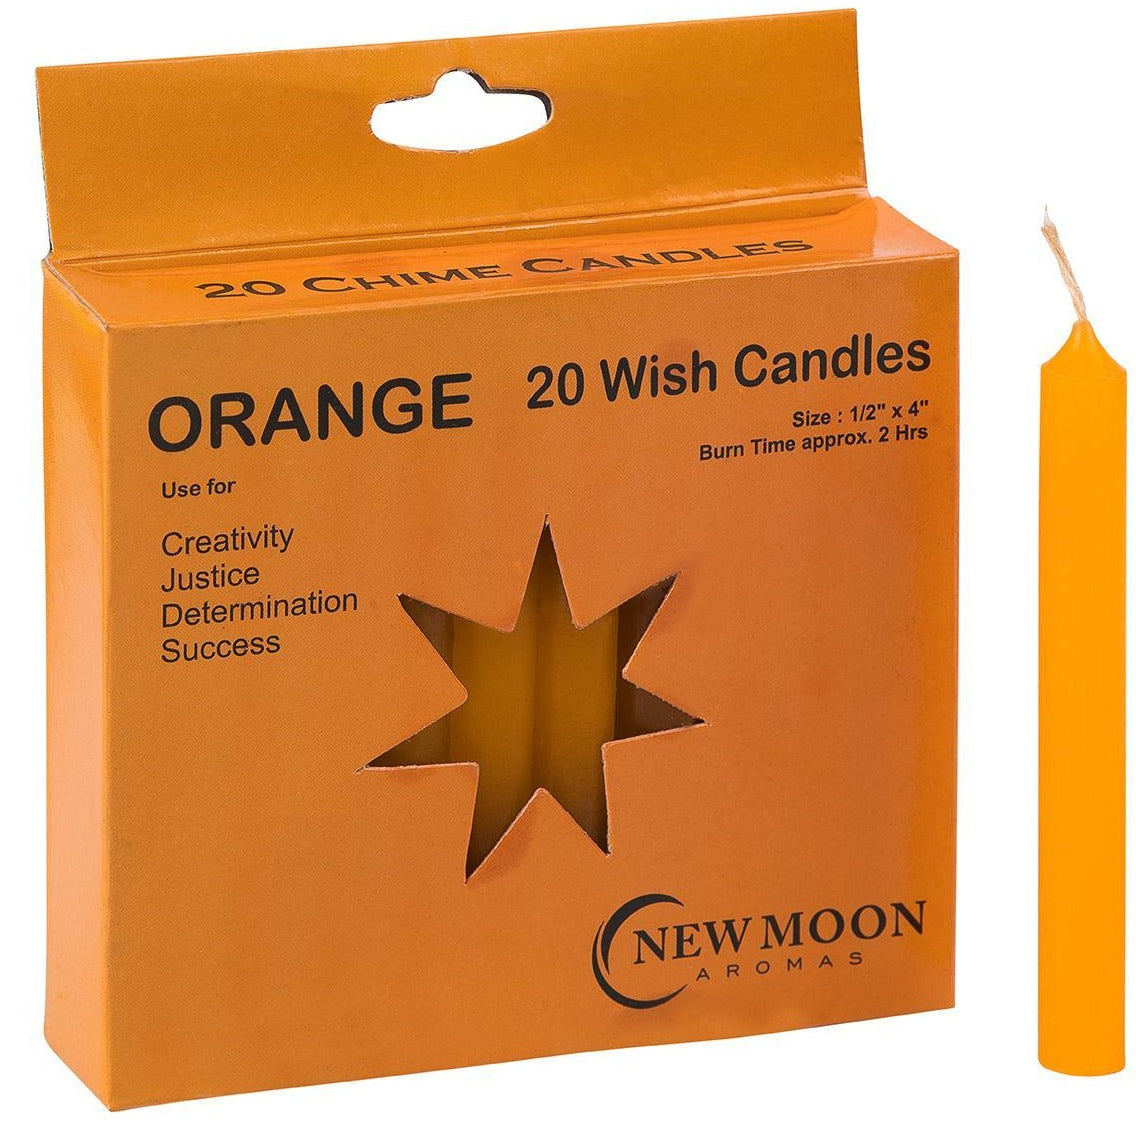 Orange Chime Candles Spirituality The Crystal and Wellness Warehouse 